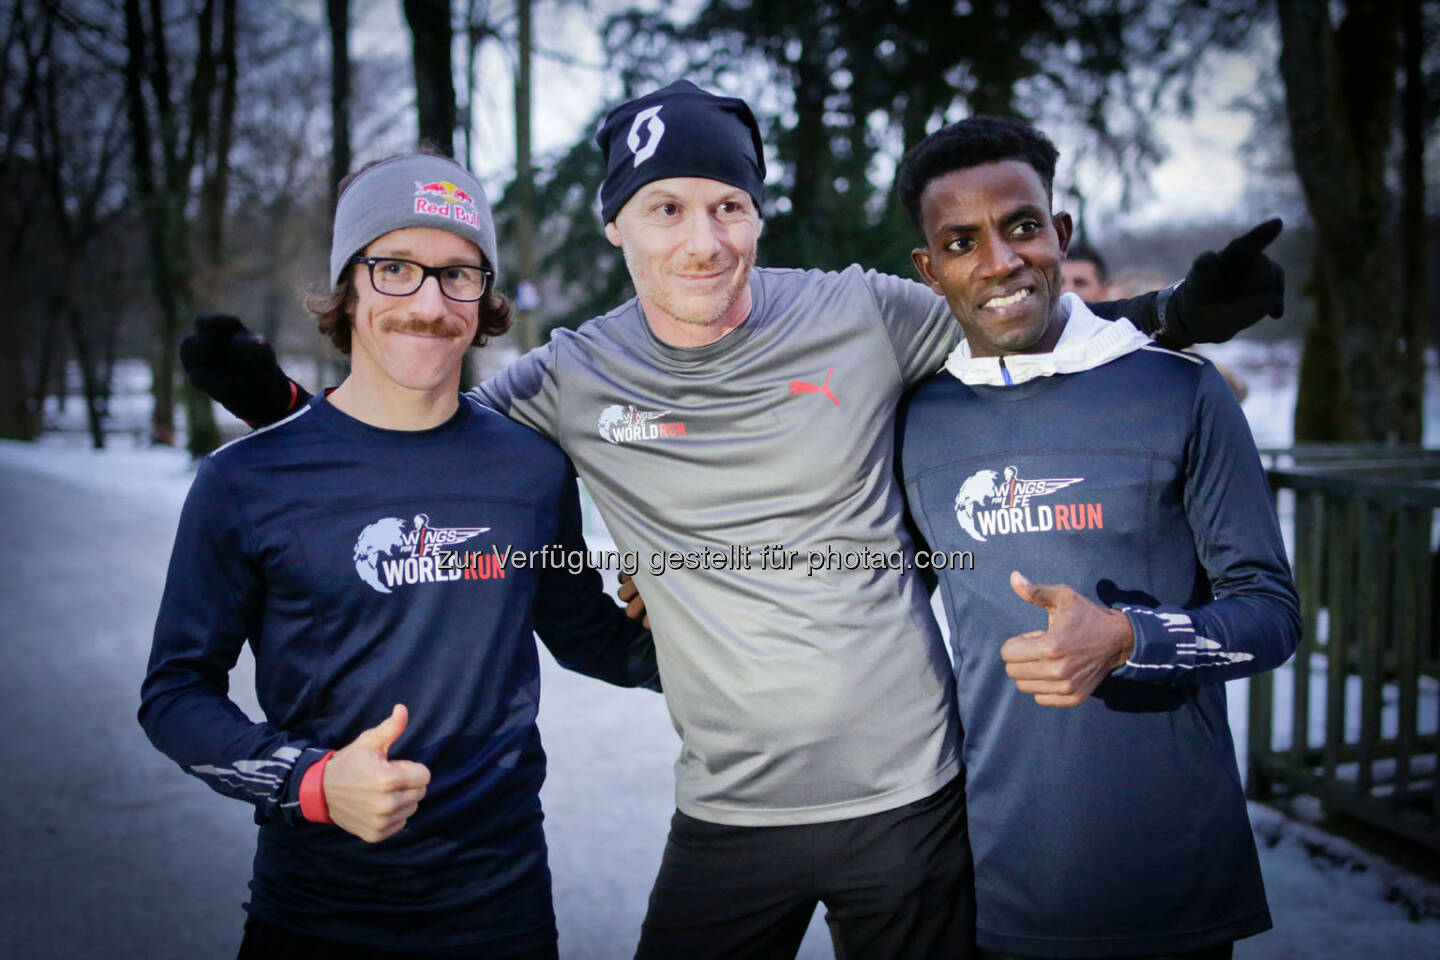 Participants at the Wings for Life World Run event in Munich 23rd of January 2016, with Thomas Rottenberg   (Bild: Daniel Grund)